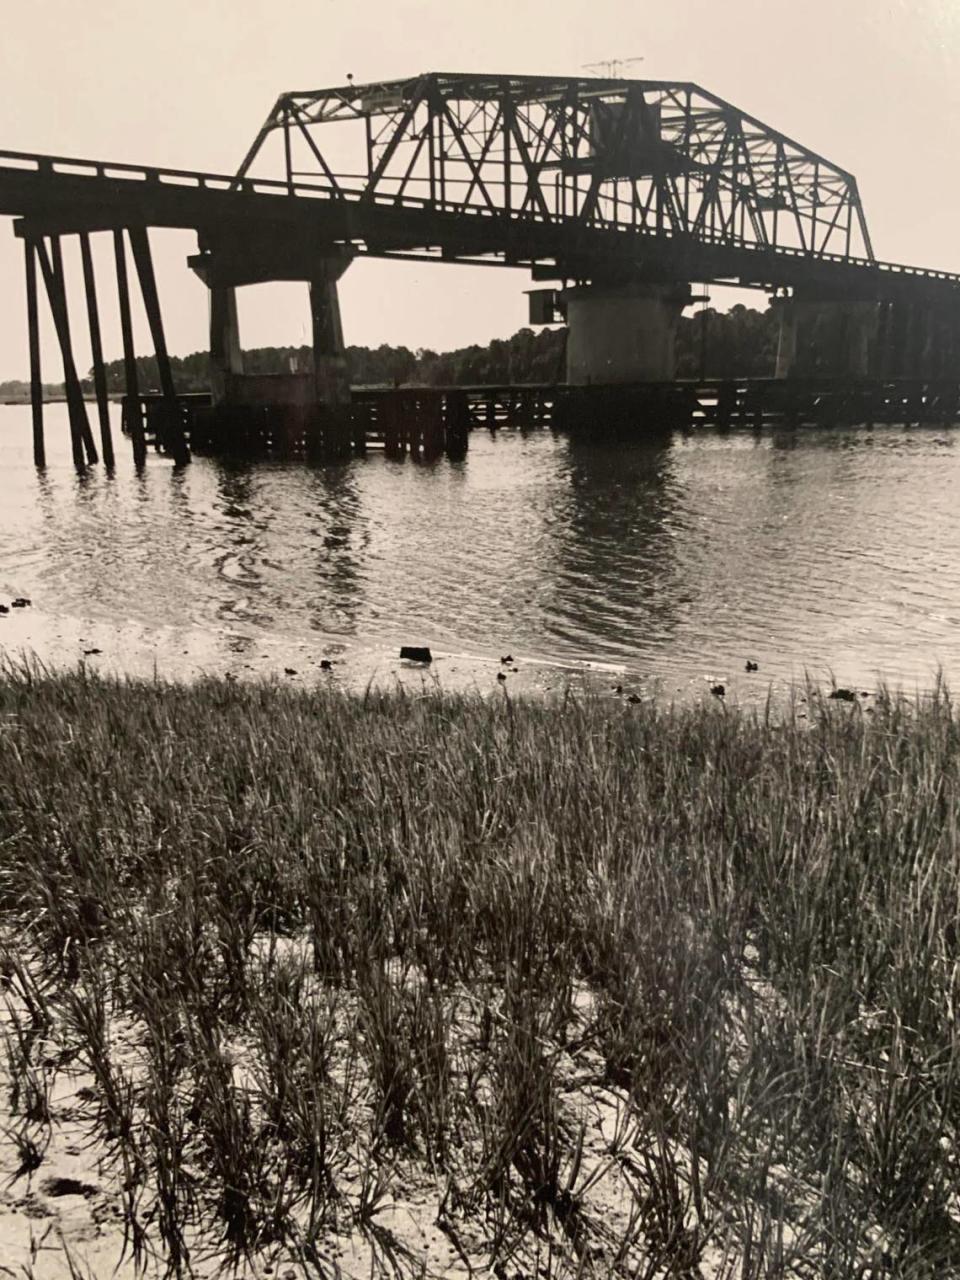 The old swing bridge to Hilton Head Island. There was a time when deer outnumbered people on the island.